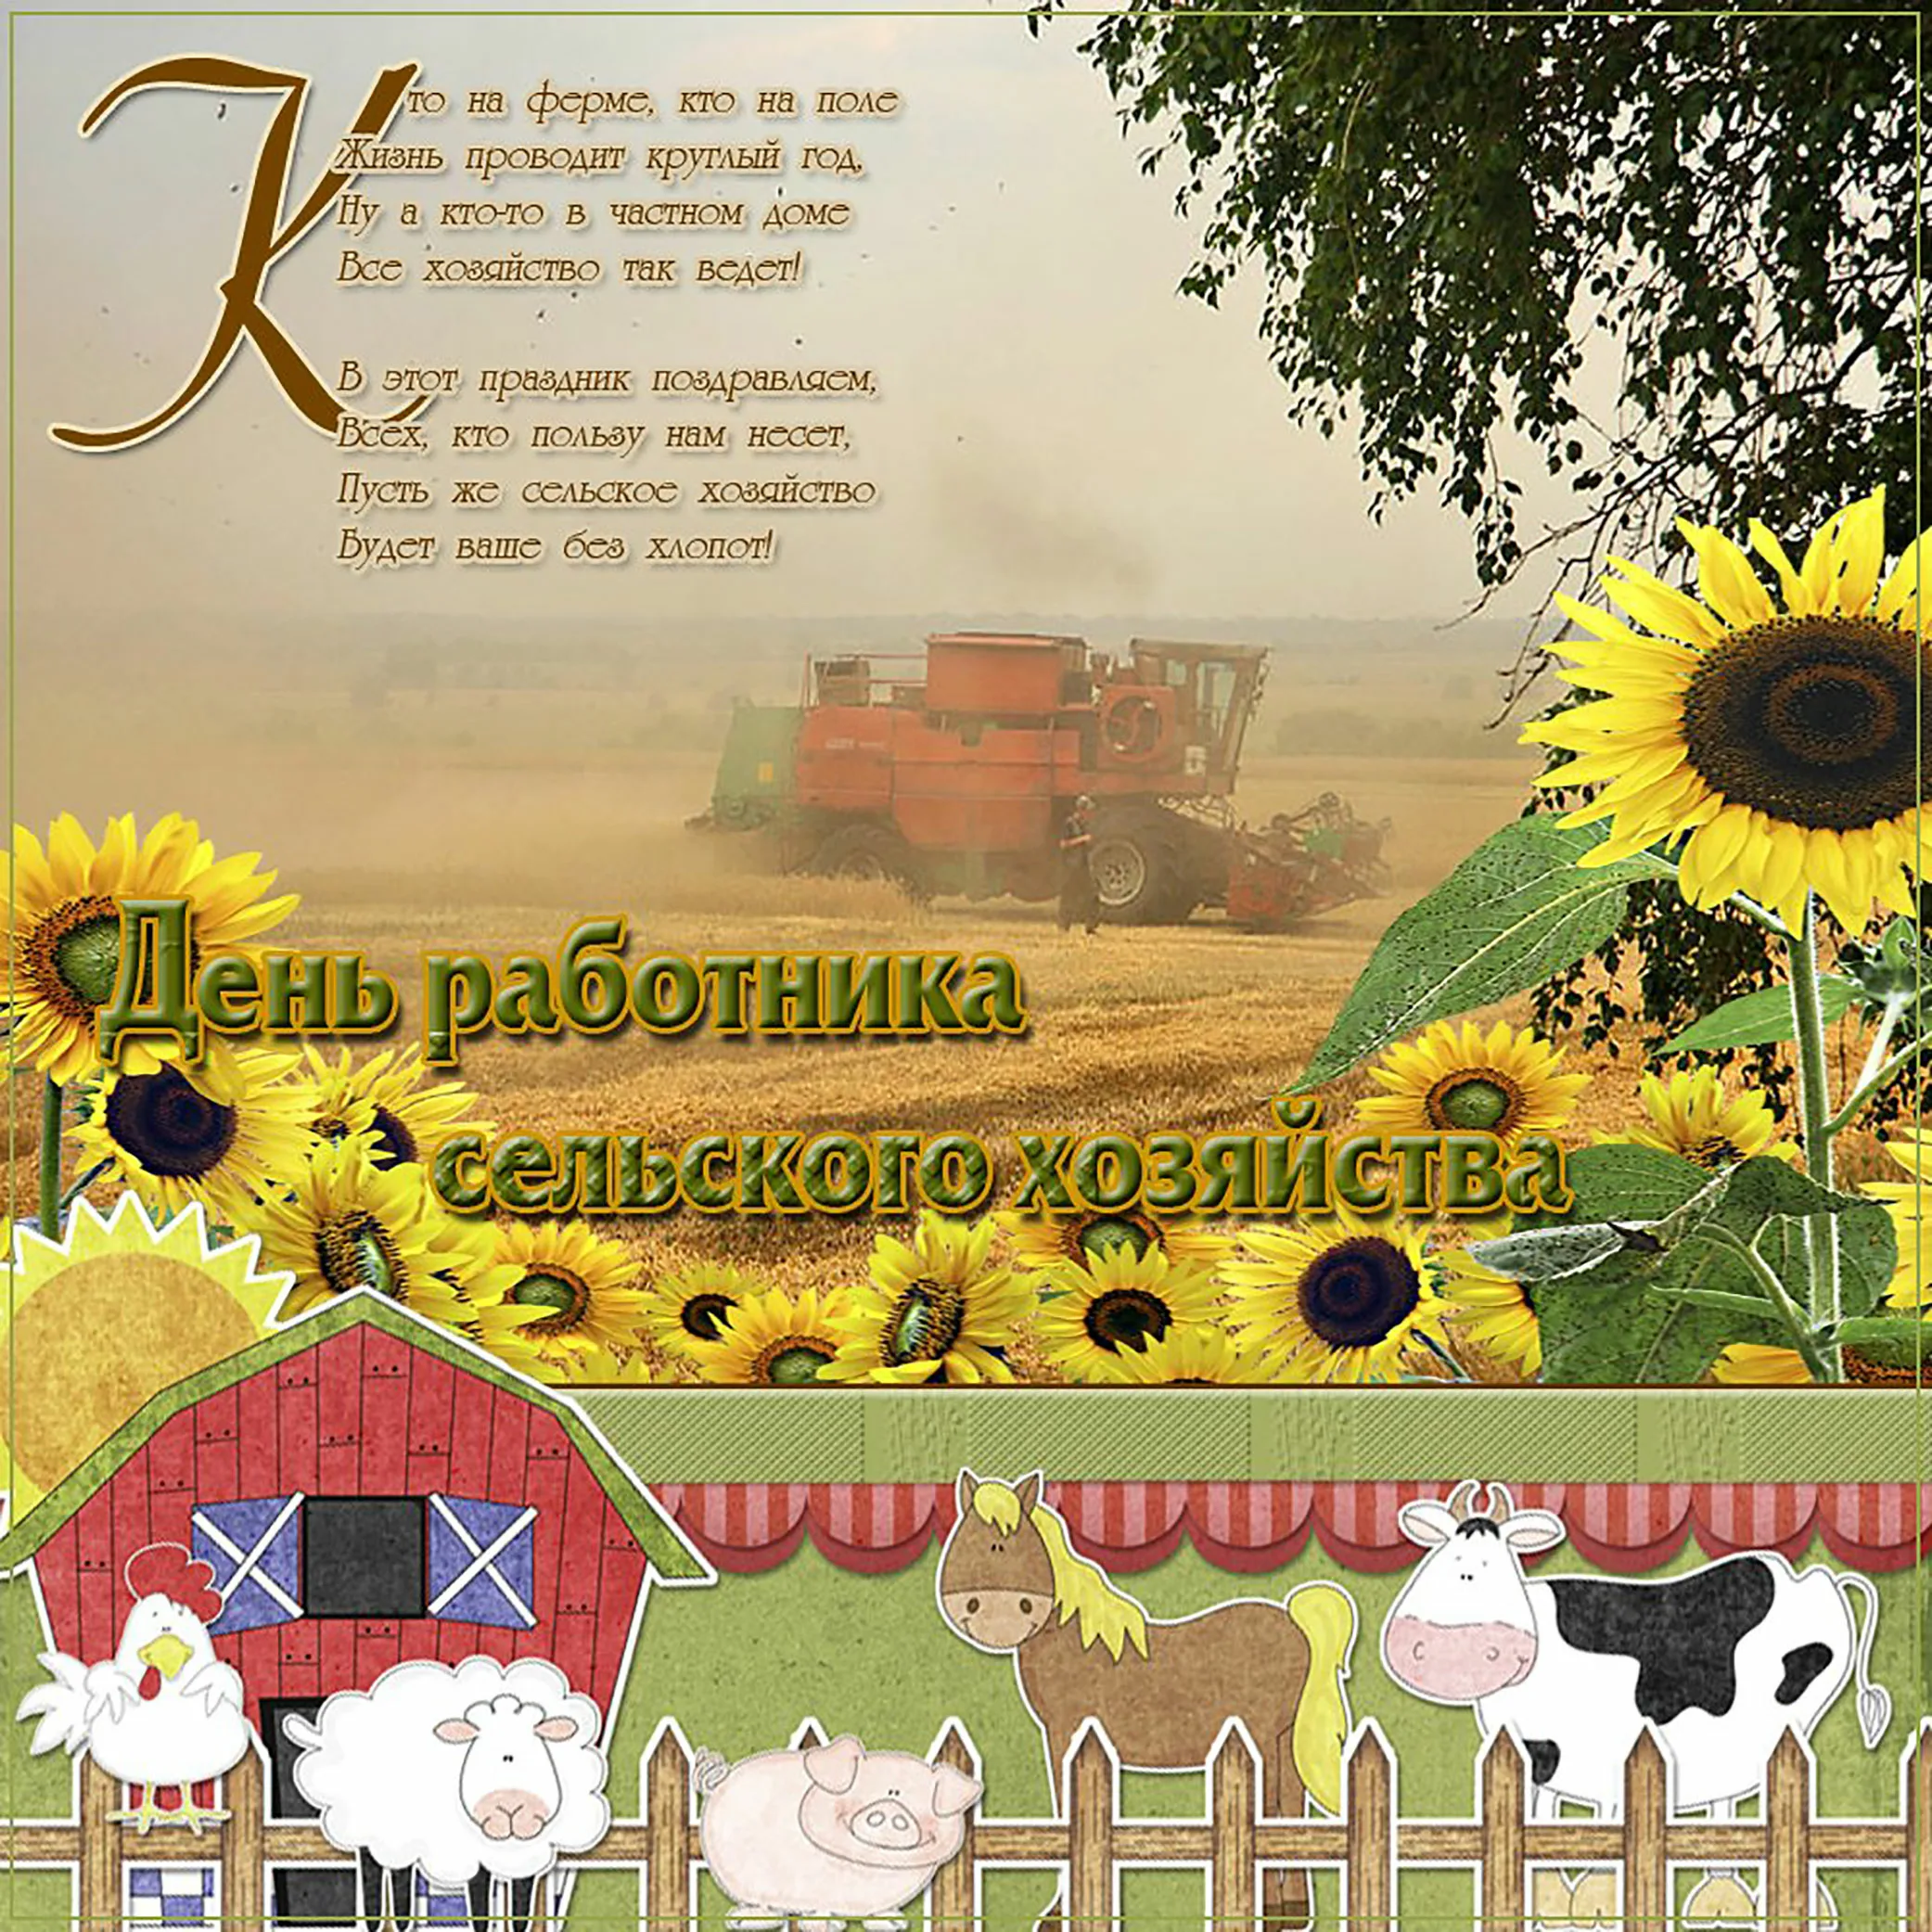 Фото Congratulations on the Day of Agricultural Workers of Ukraine #1